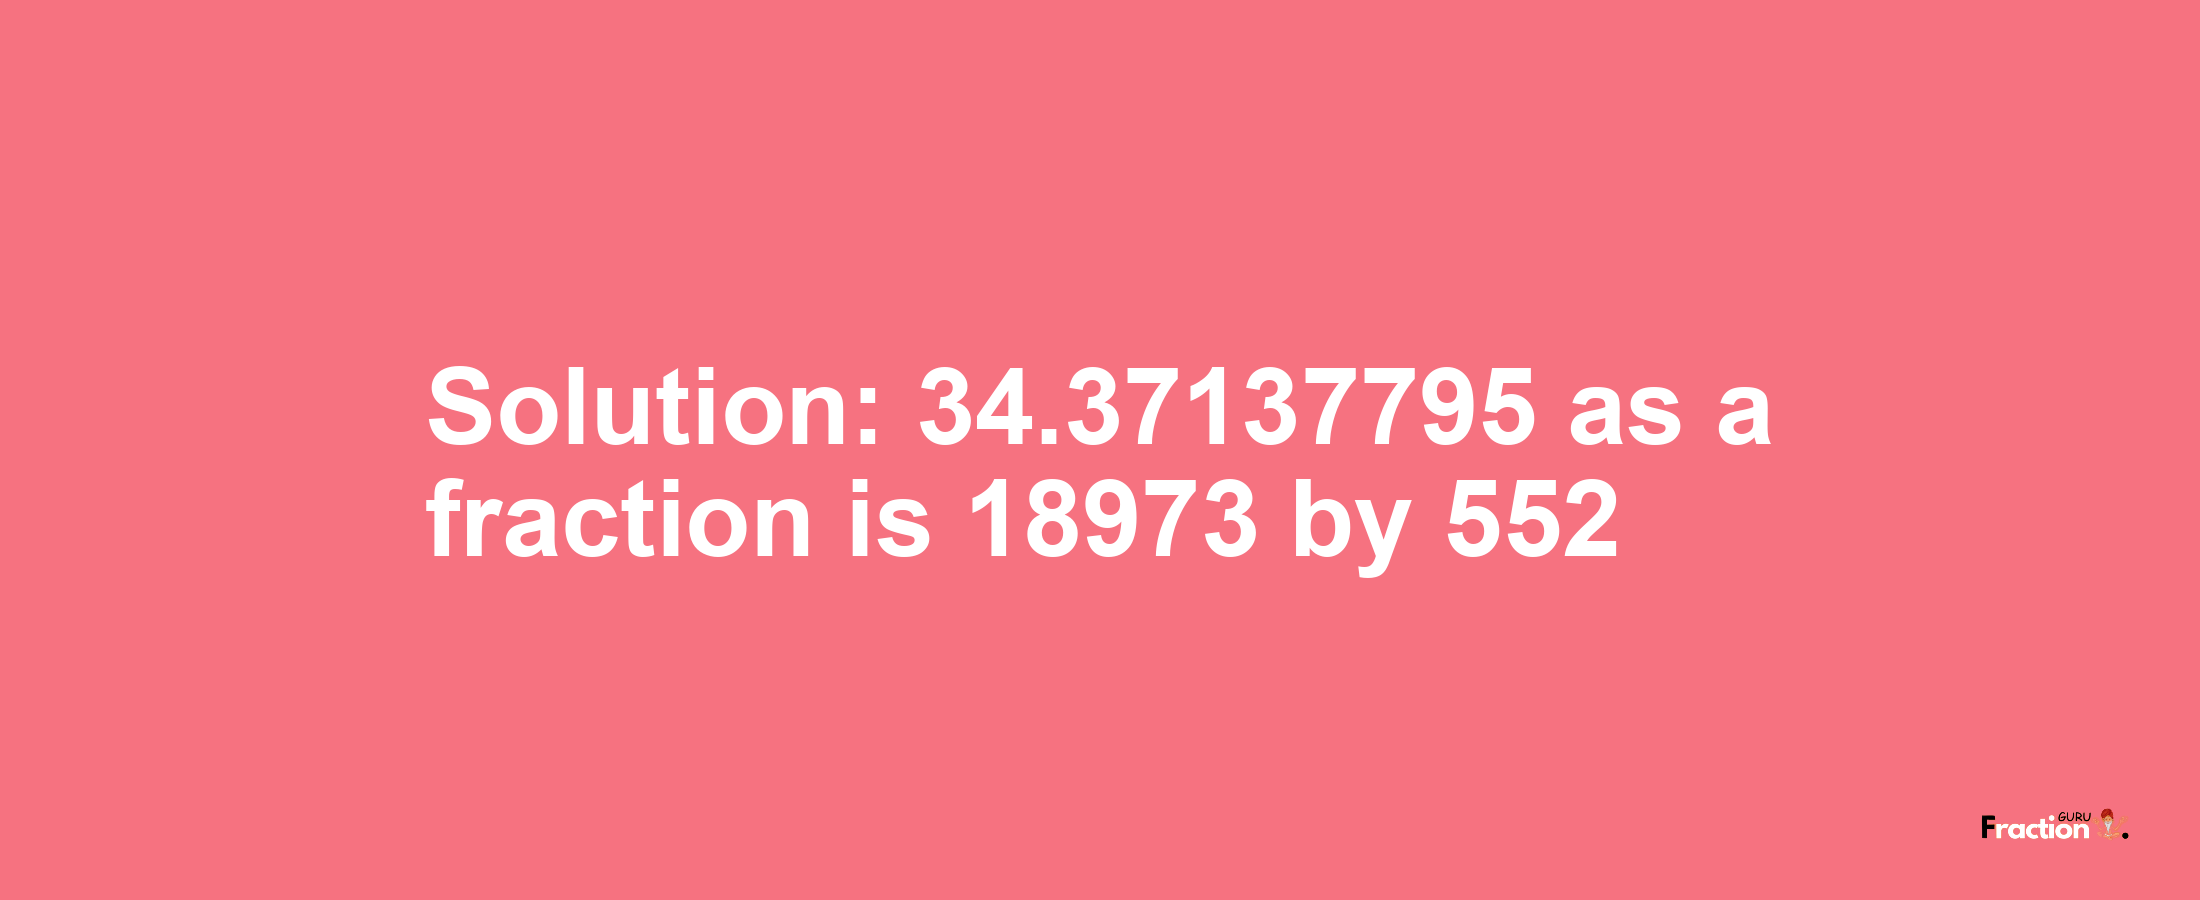 Solution:34.37137795 as a fraction is 18973/552